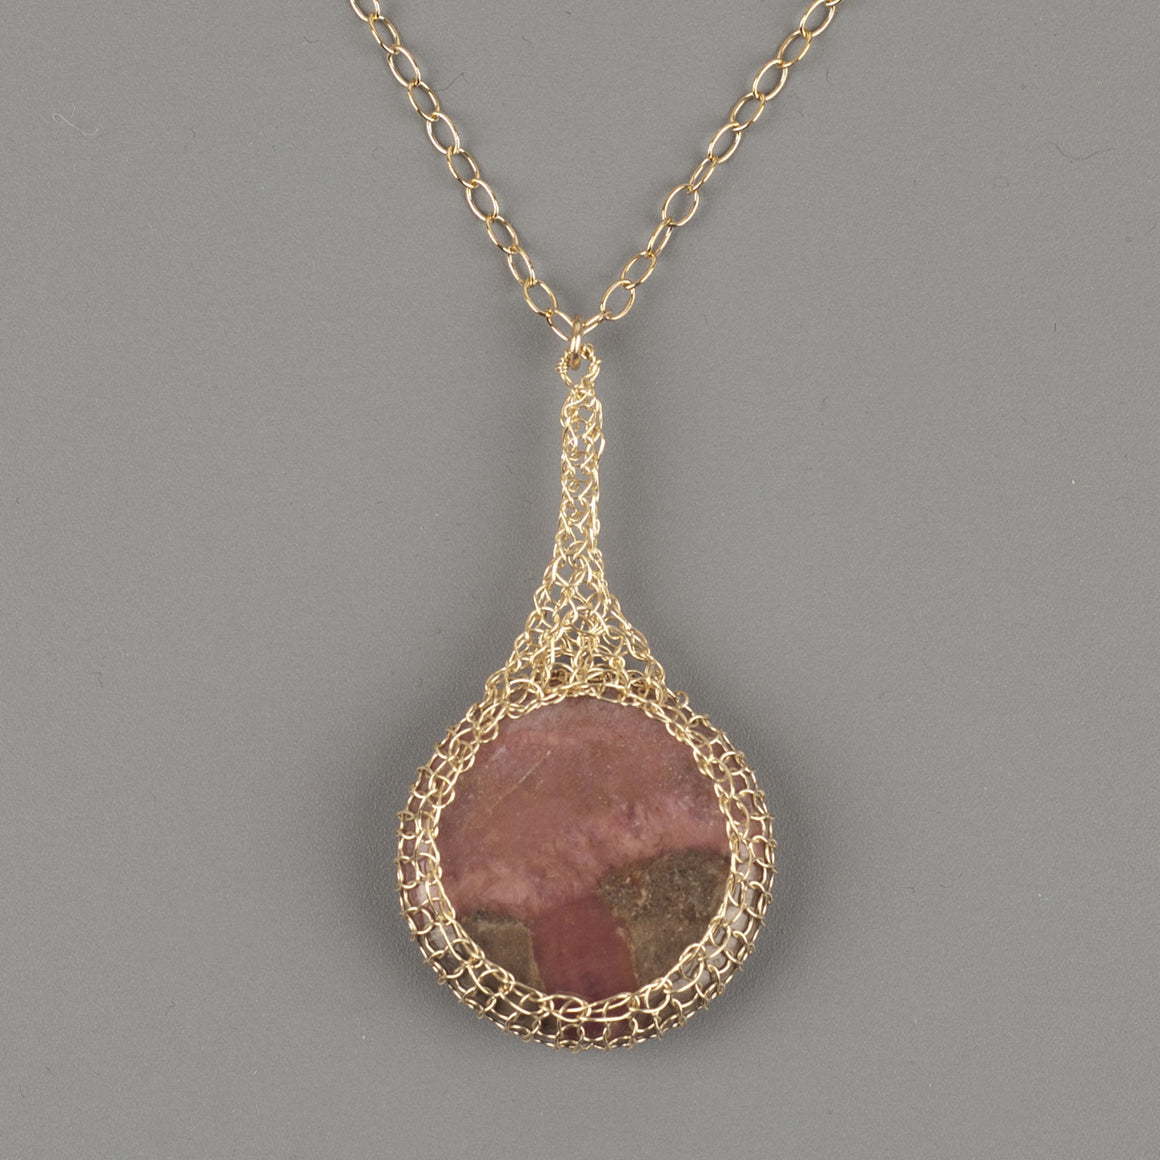 Large round Rhodonite pendant necklace, nested in gold wire crochet - Yooladesign